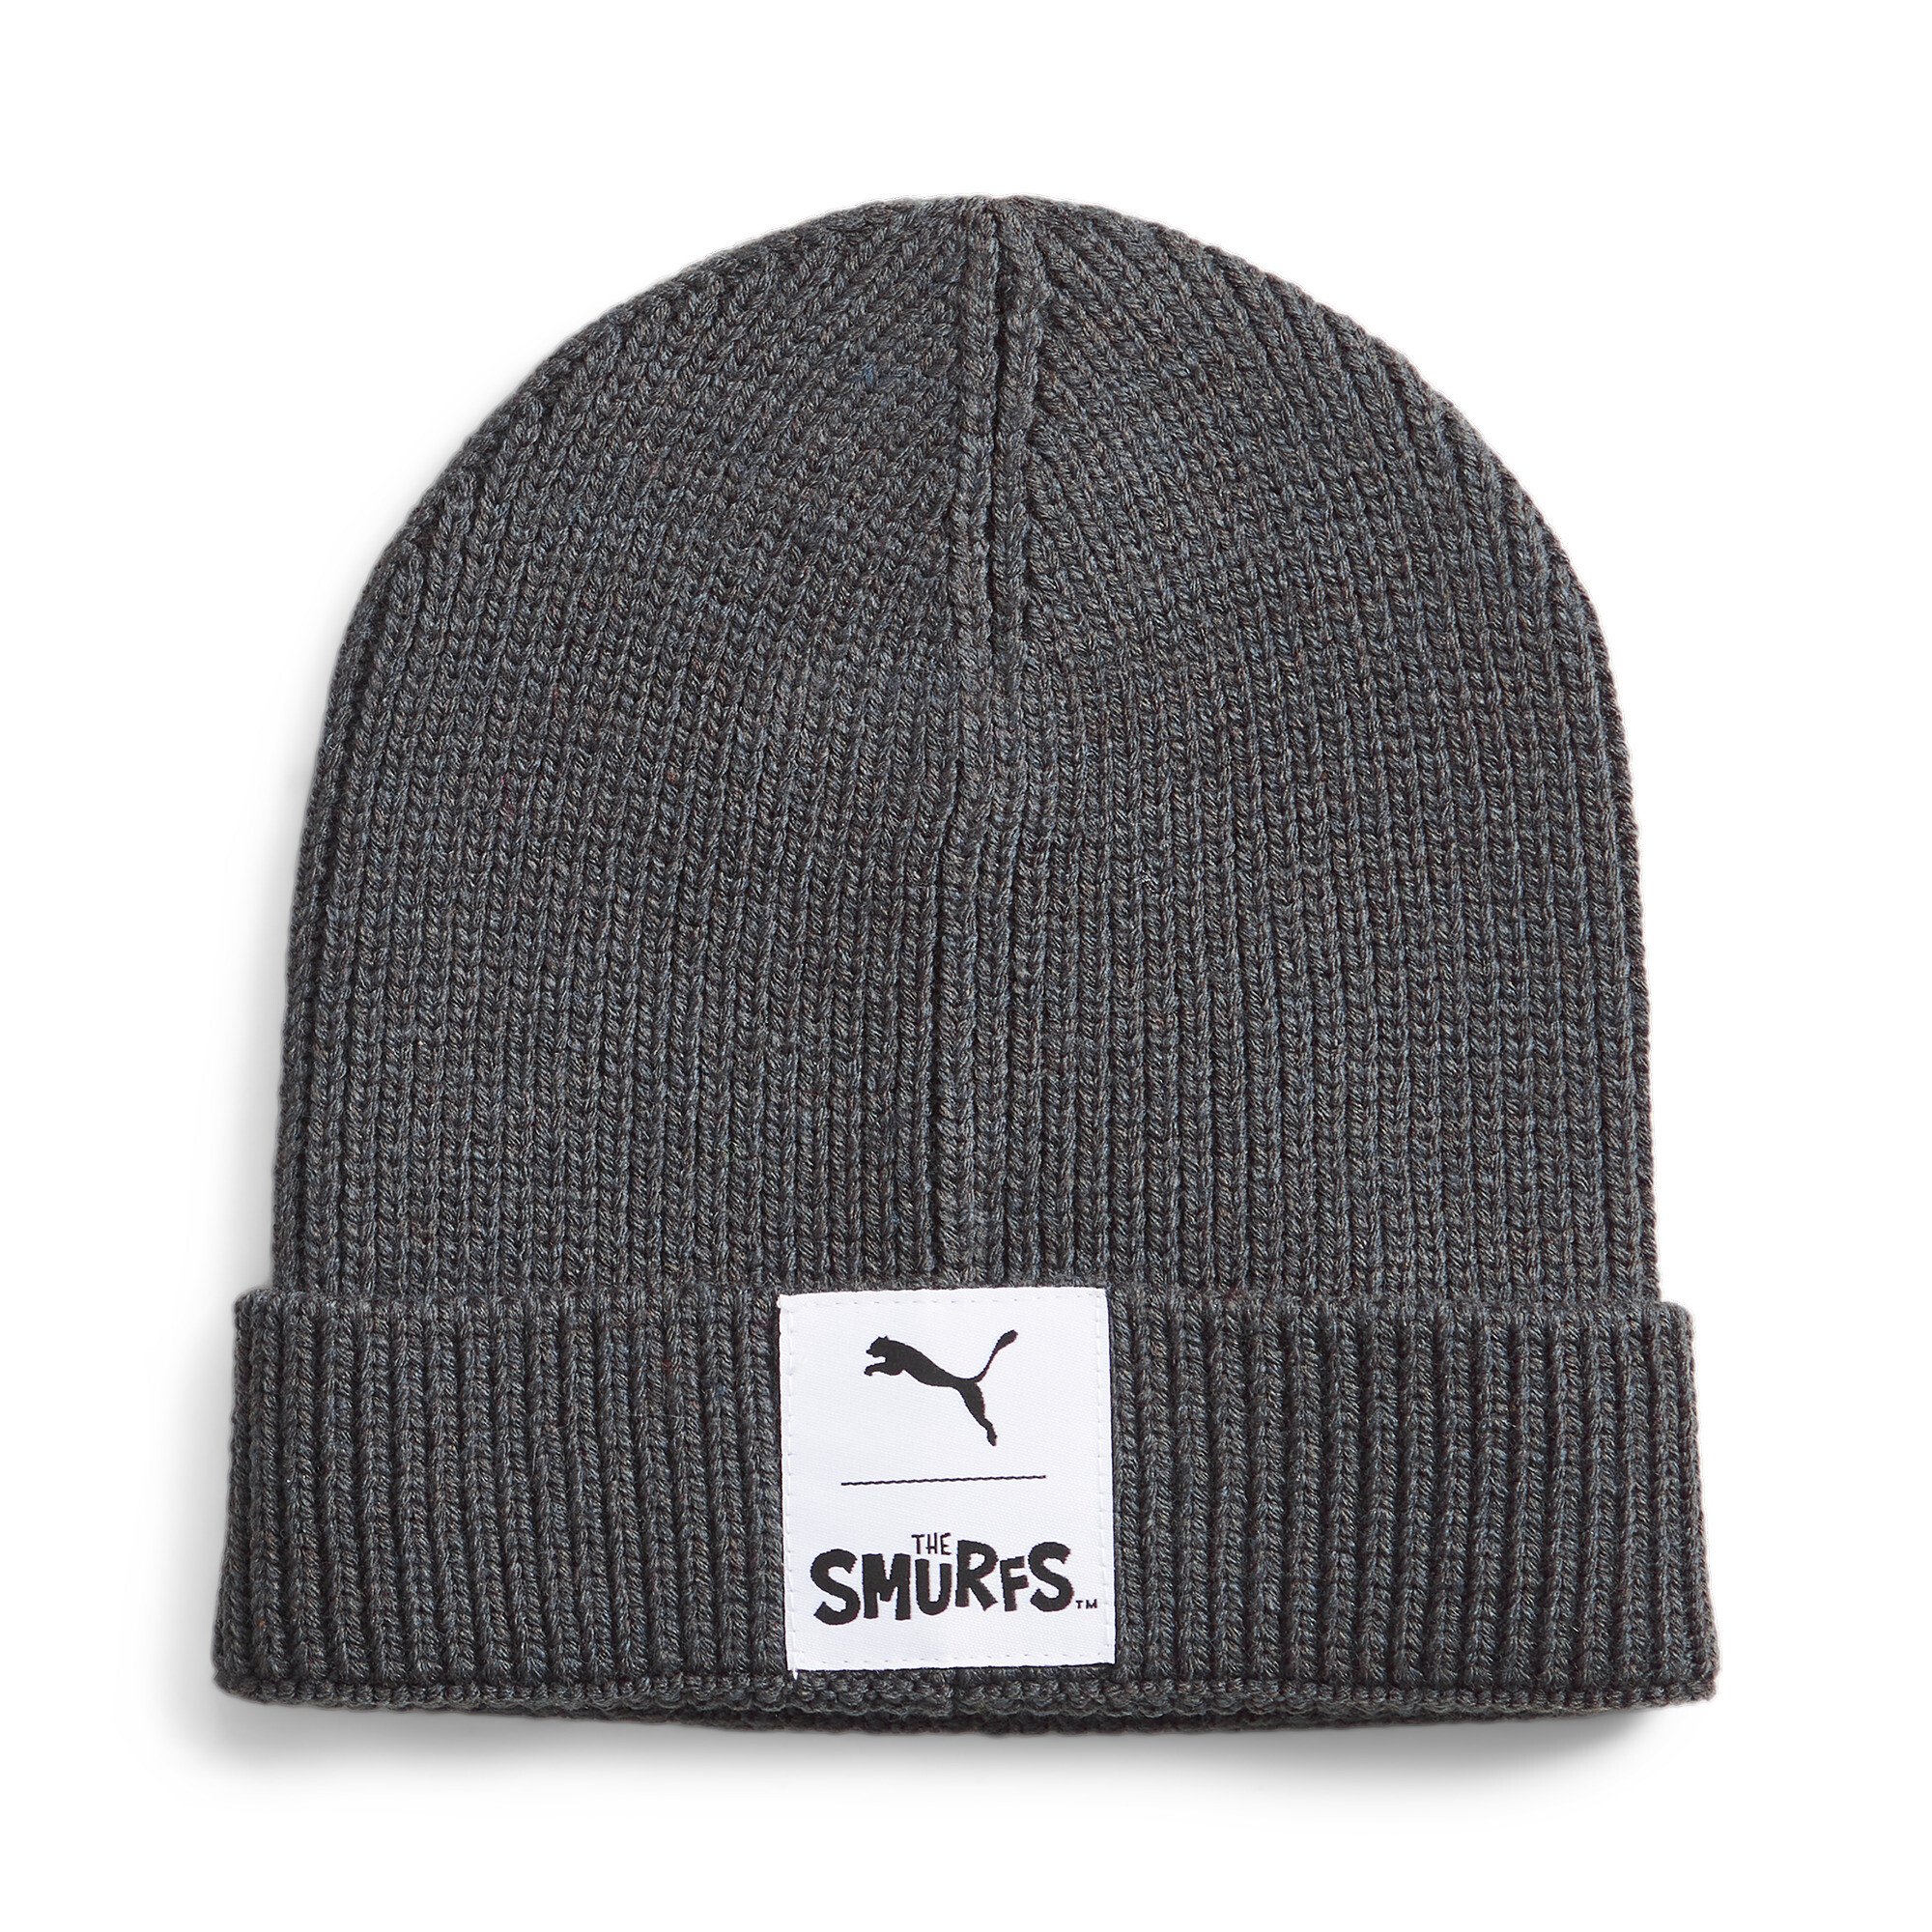 PUMA X THE SMURFS Beanie In Gray, Size Youth